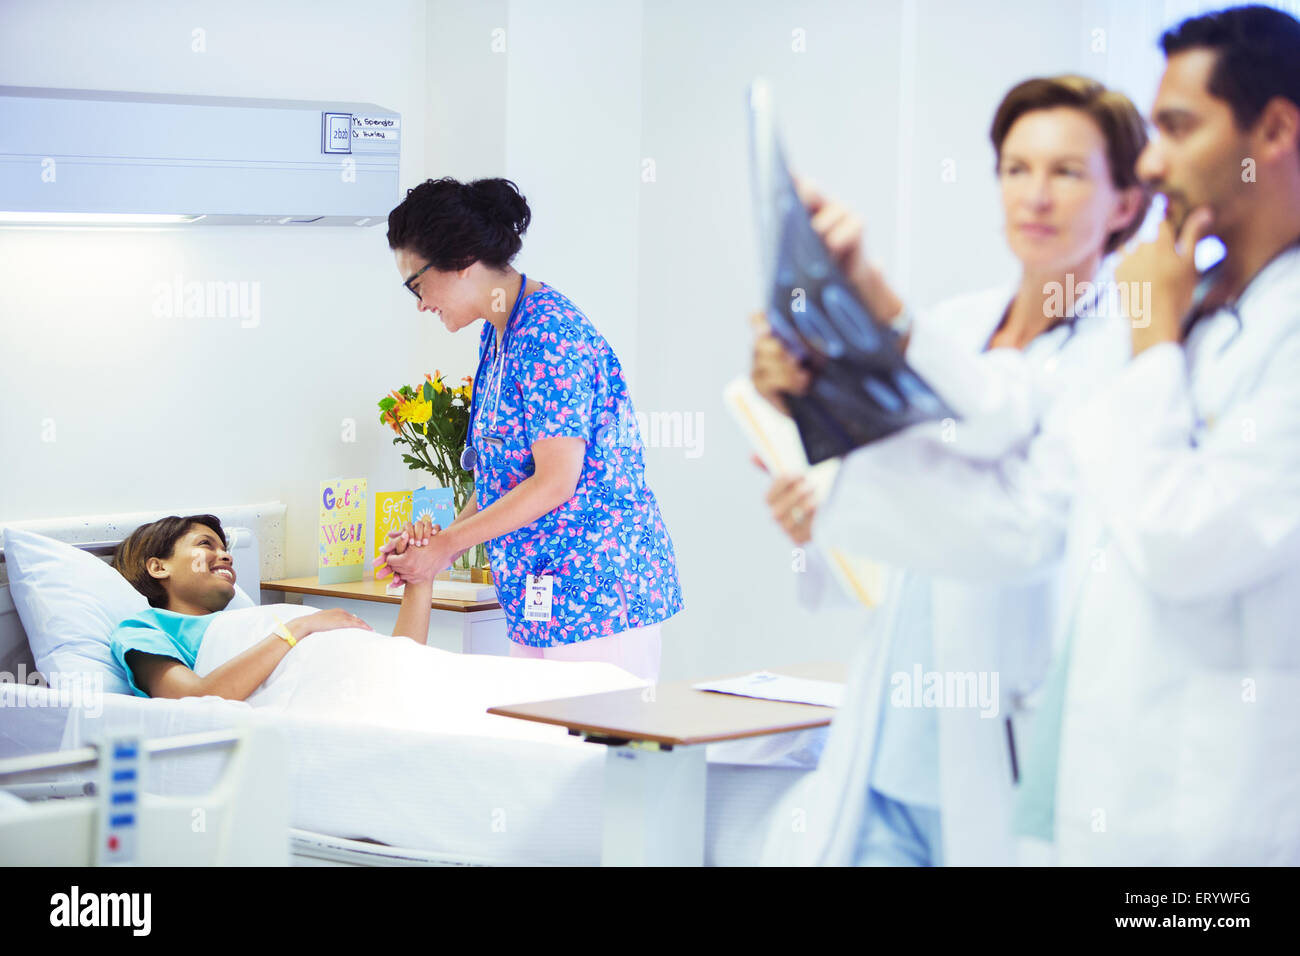 Nurse holding hands with patient in hospital room Stock Photo